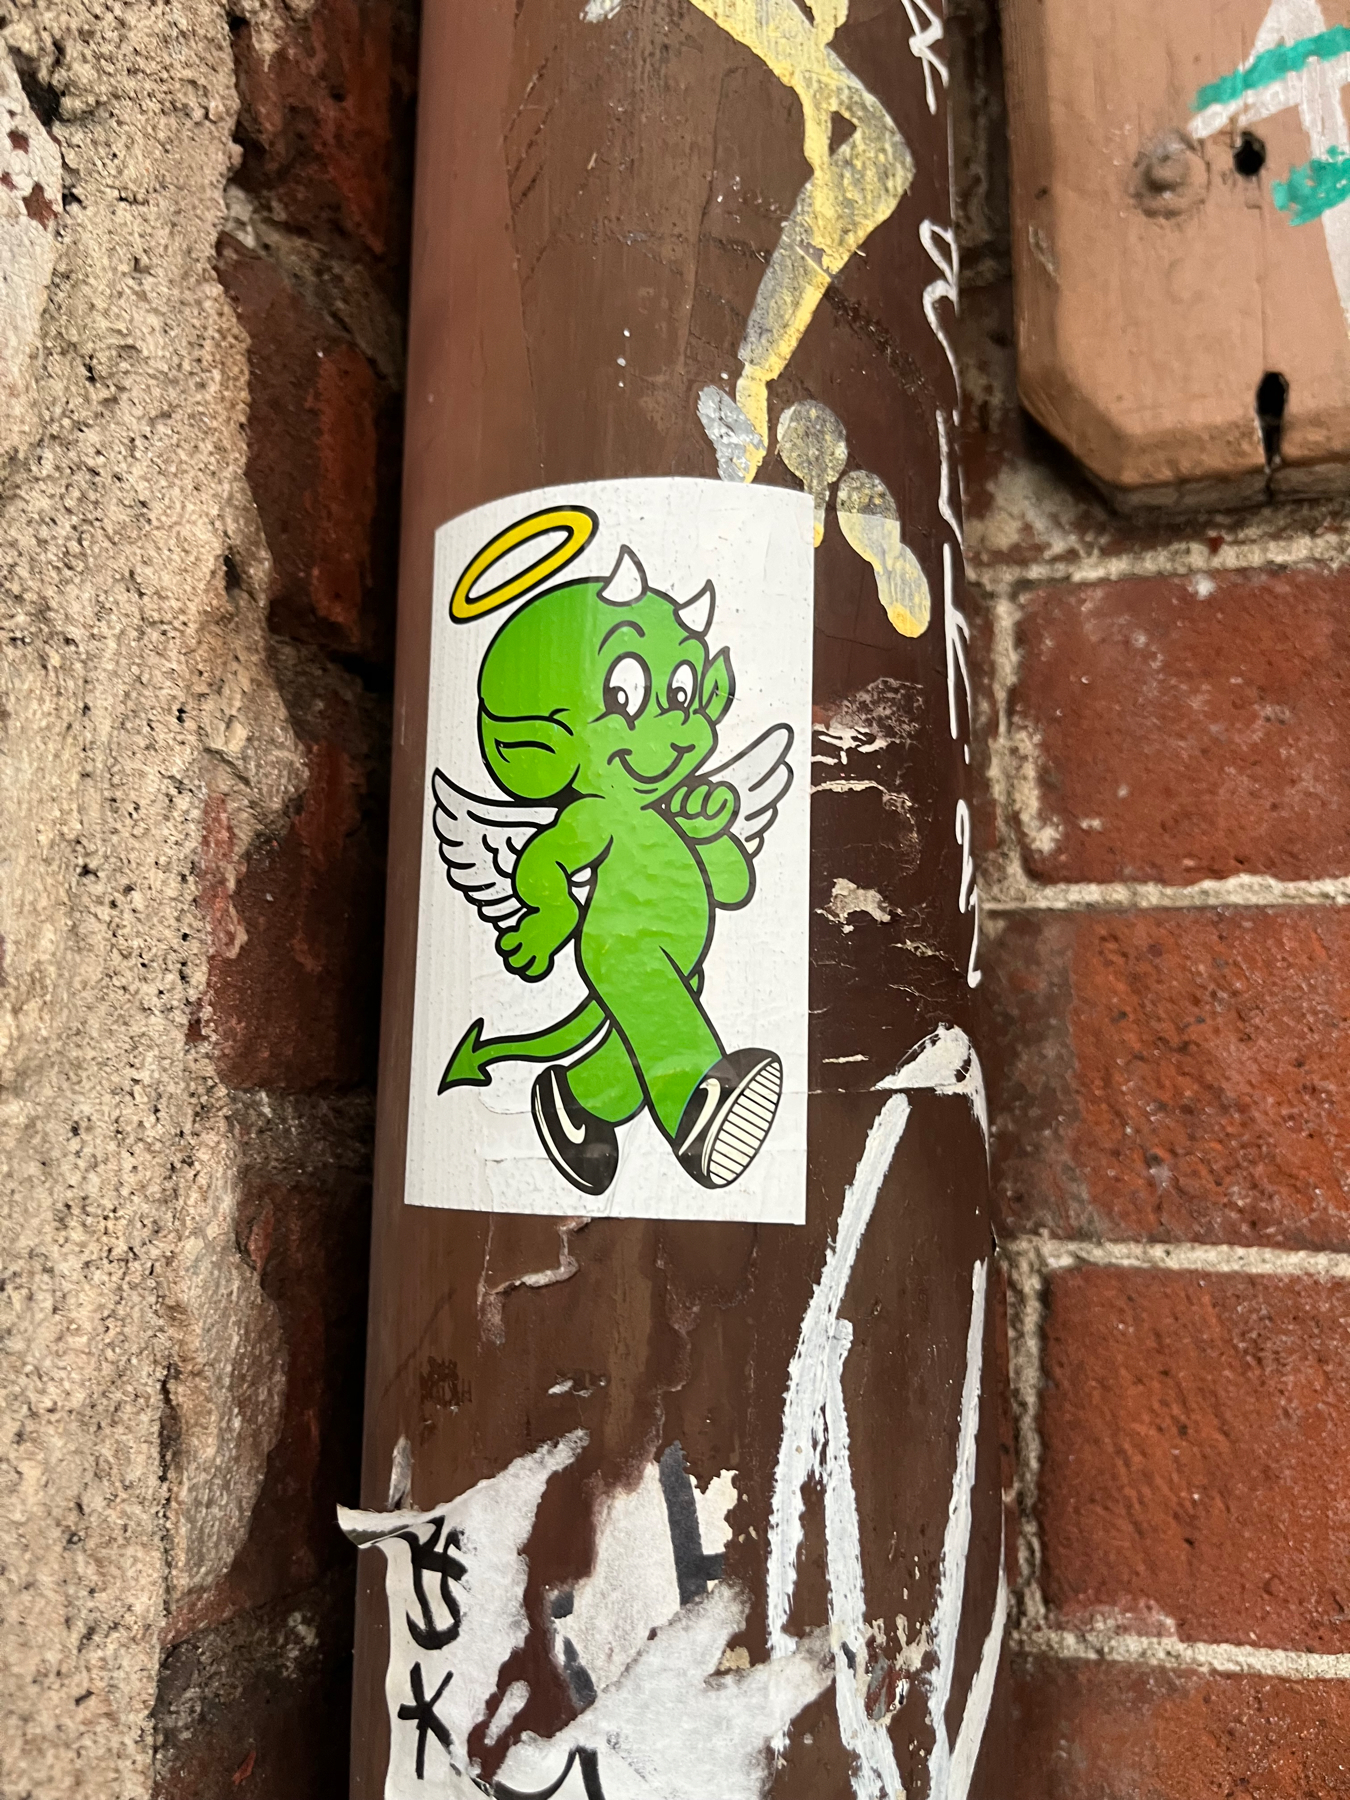 A sticker on a pipe depicting a walking green devil with black shoes on, small white wings, a pointy tail, a smiley face with horns on top, and above him a halo